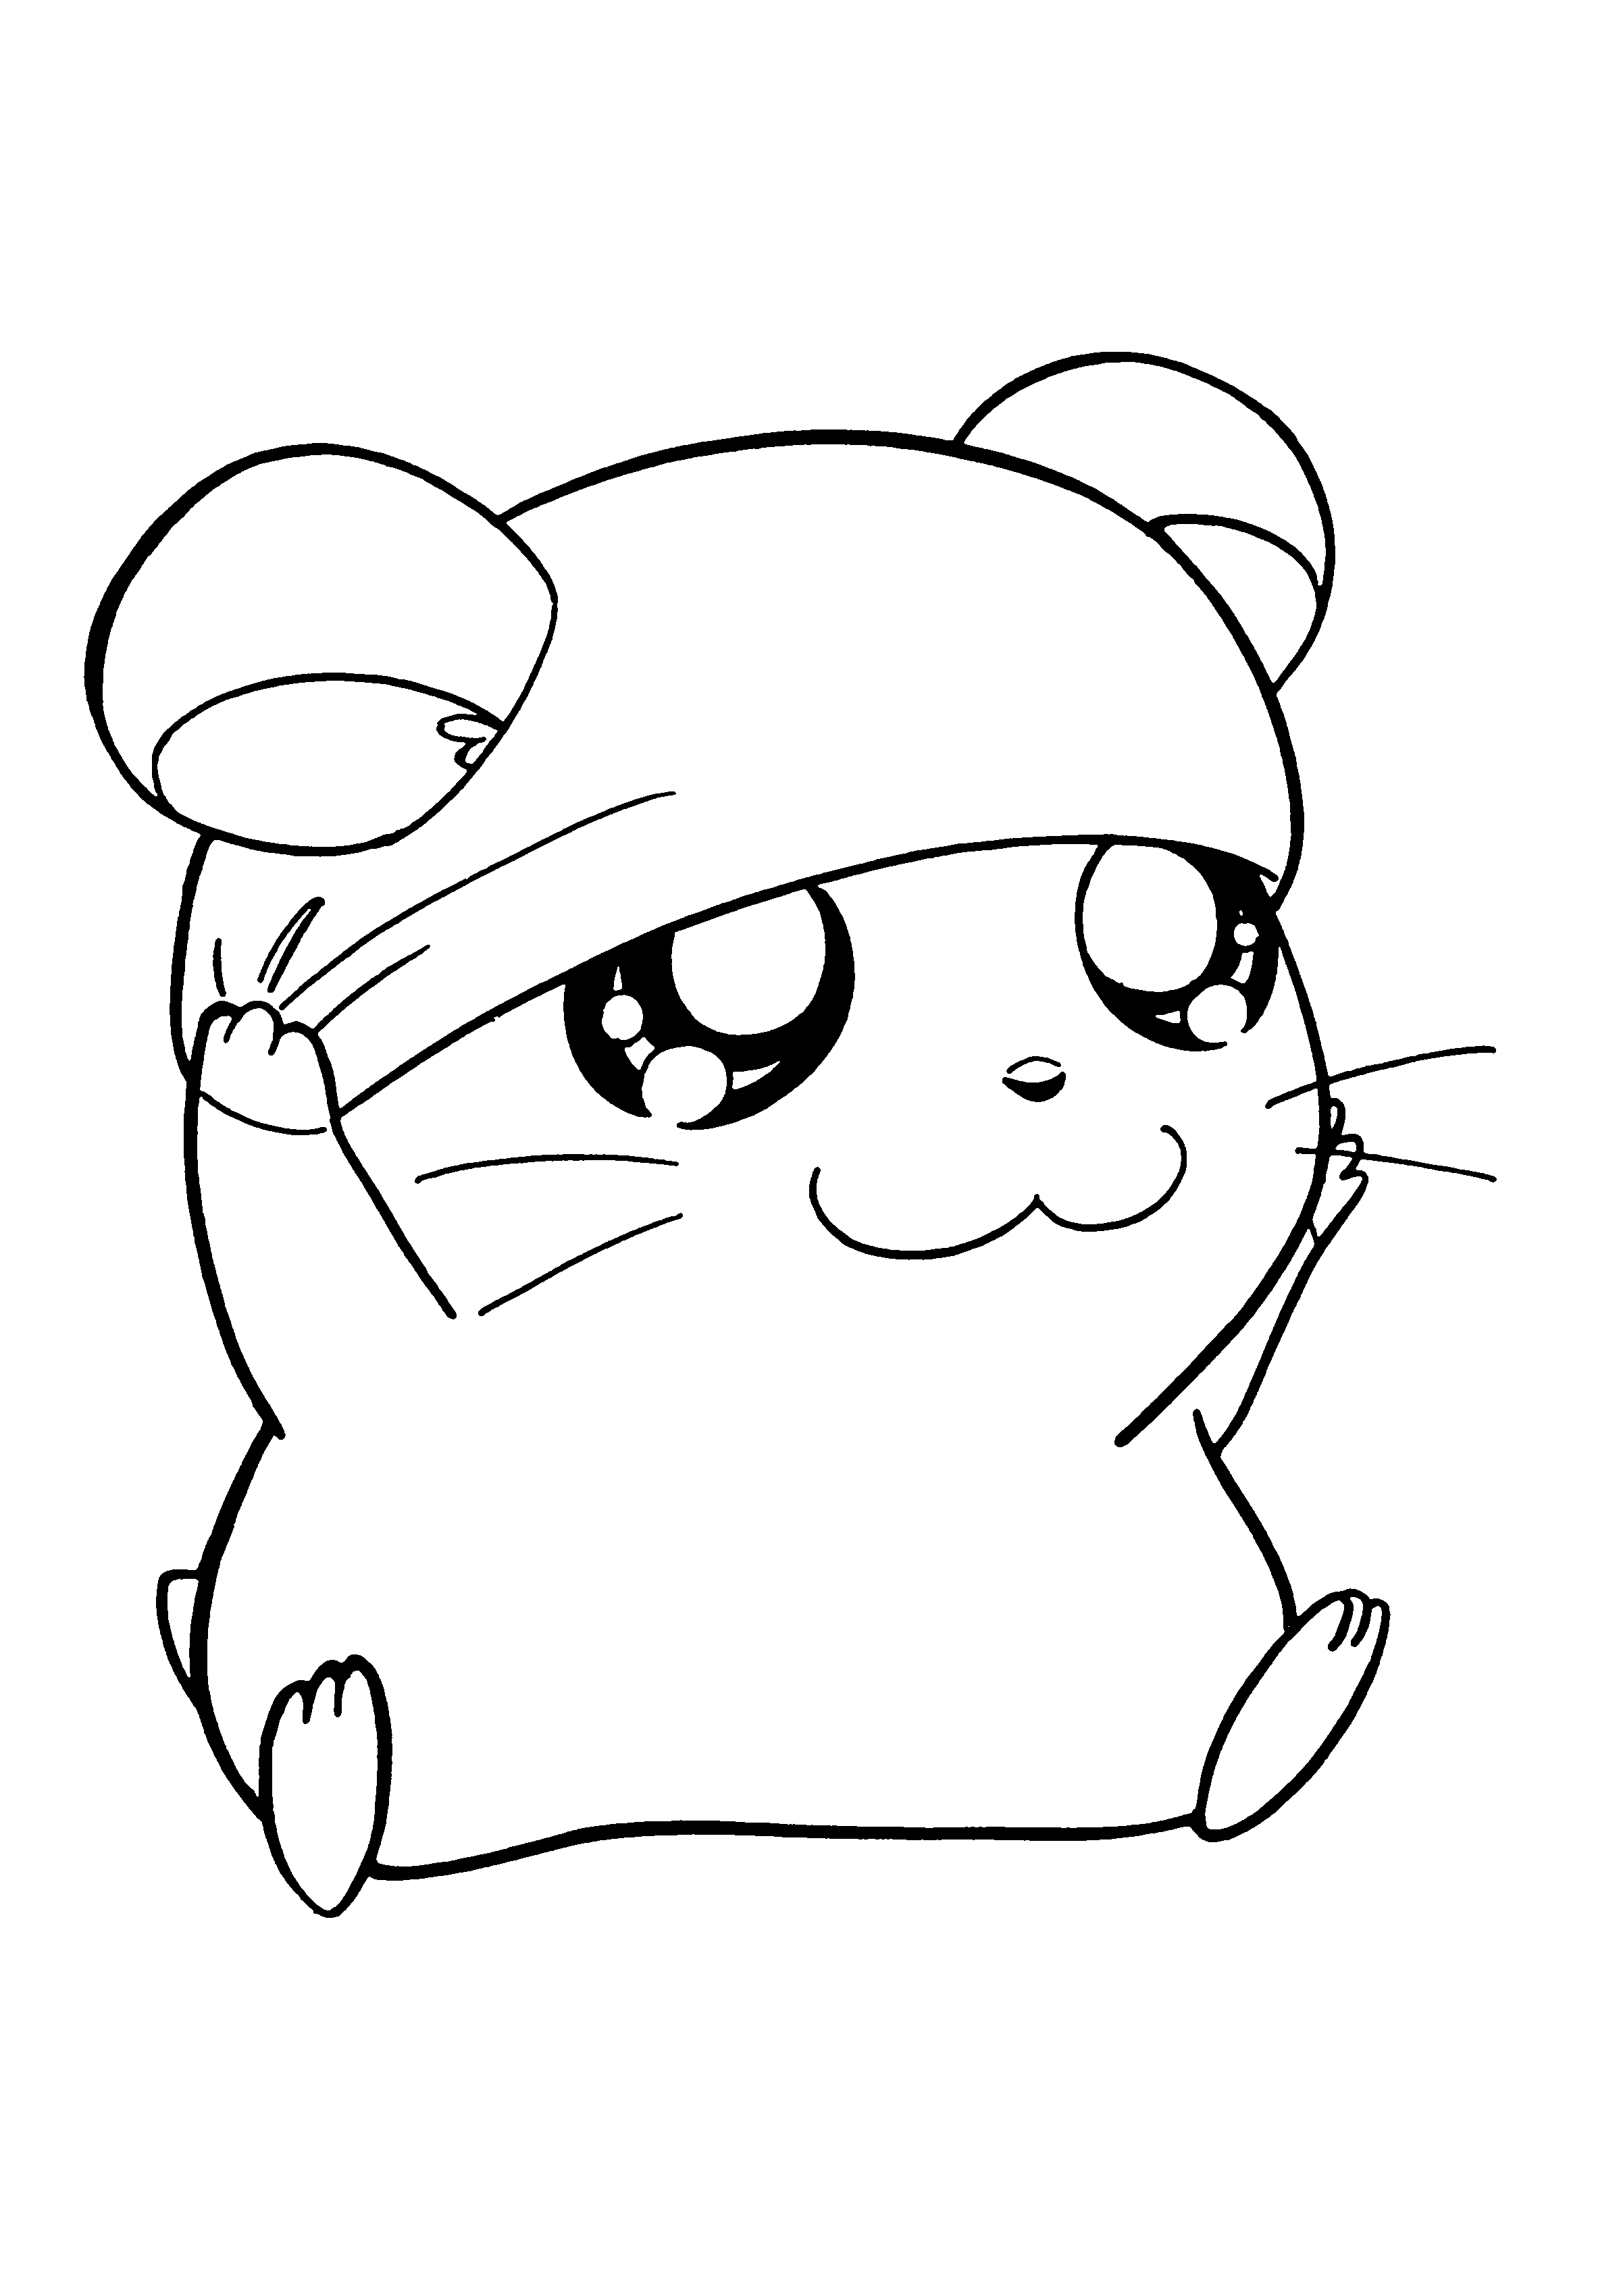 hamster coloring pages to print hamster coloring pages getcoloringpagescom print pages hamster to coloring 